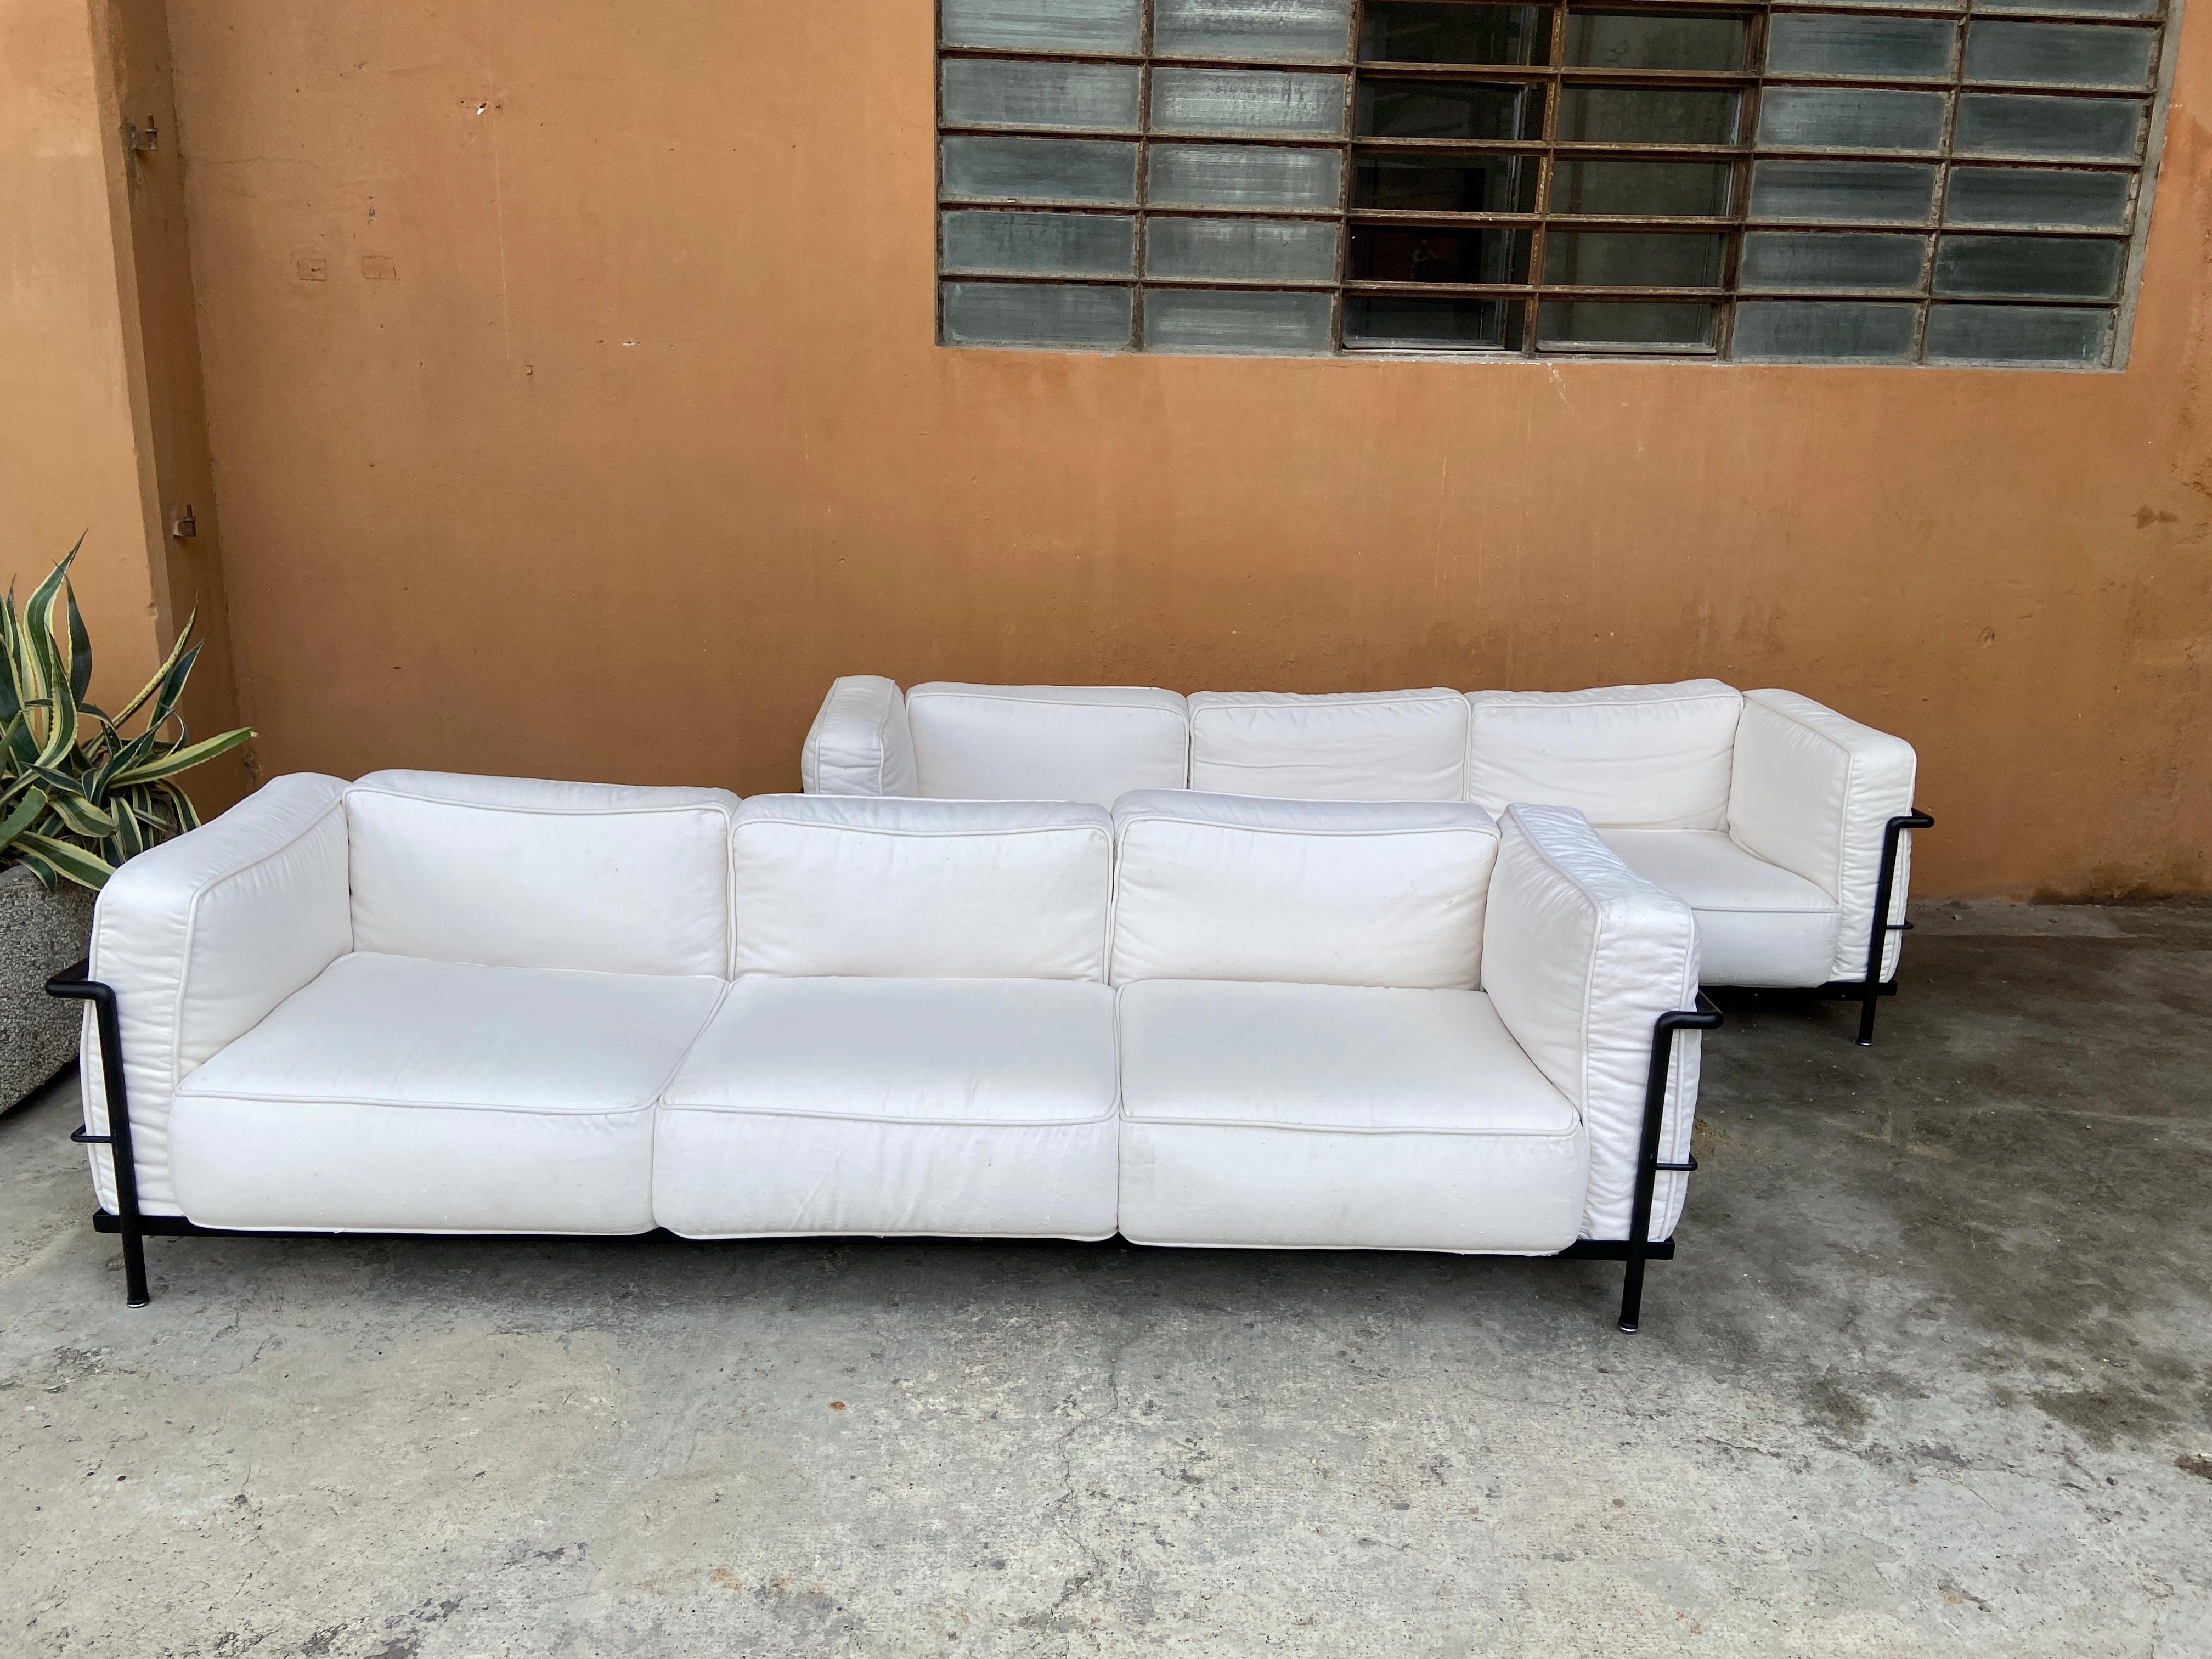 Late 20th Century Mid-Century Modern Italian Pair of Le Corbusier LC3 Style Triple-Seat Sofas For Sale